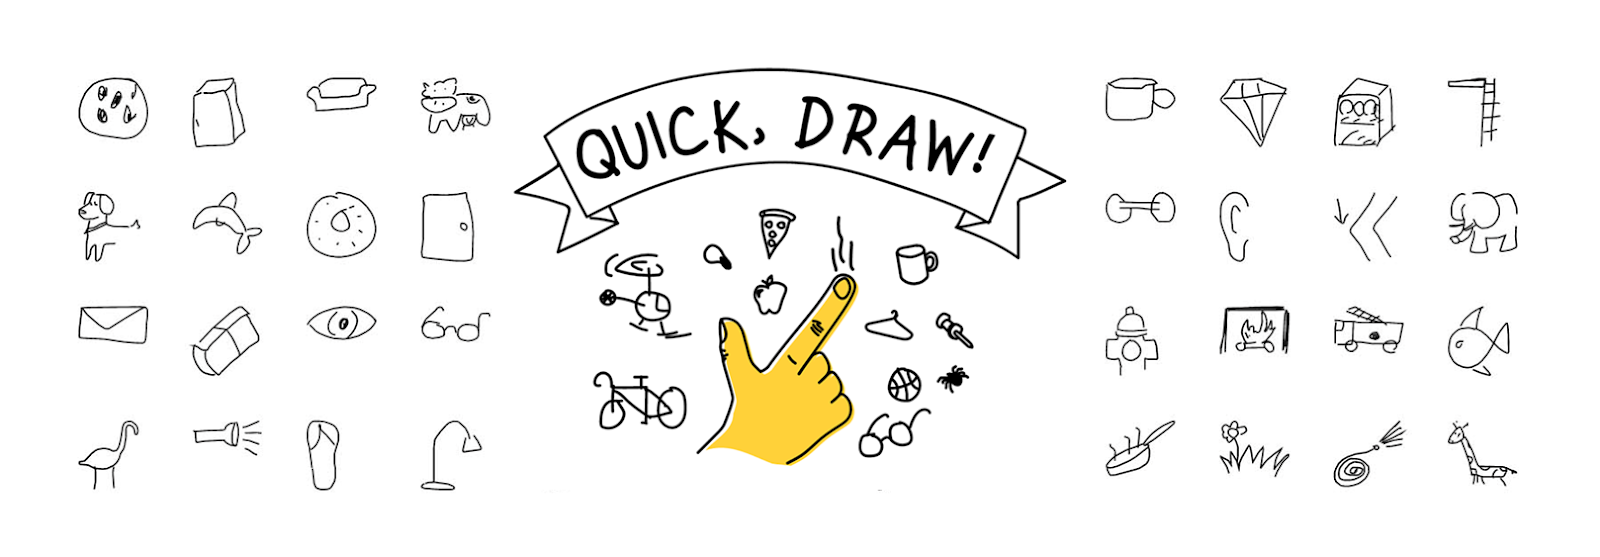 An illustration of some doodles from the dataset and the logo of Google's Quick Draw tool